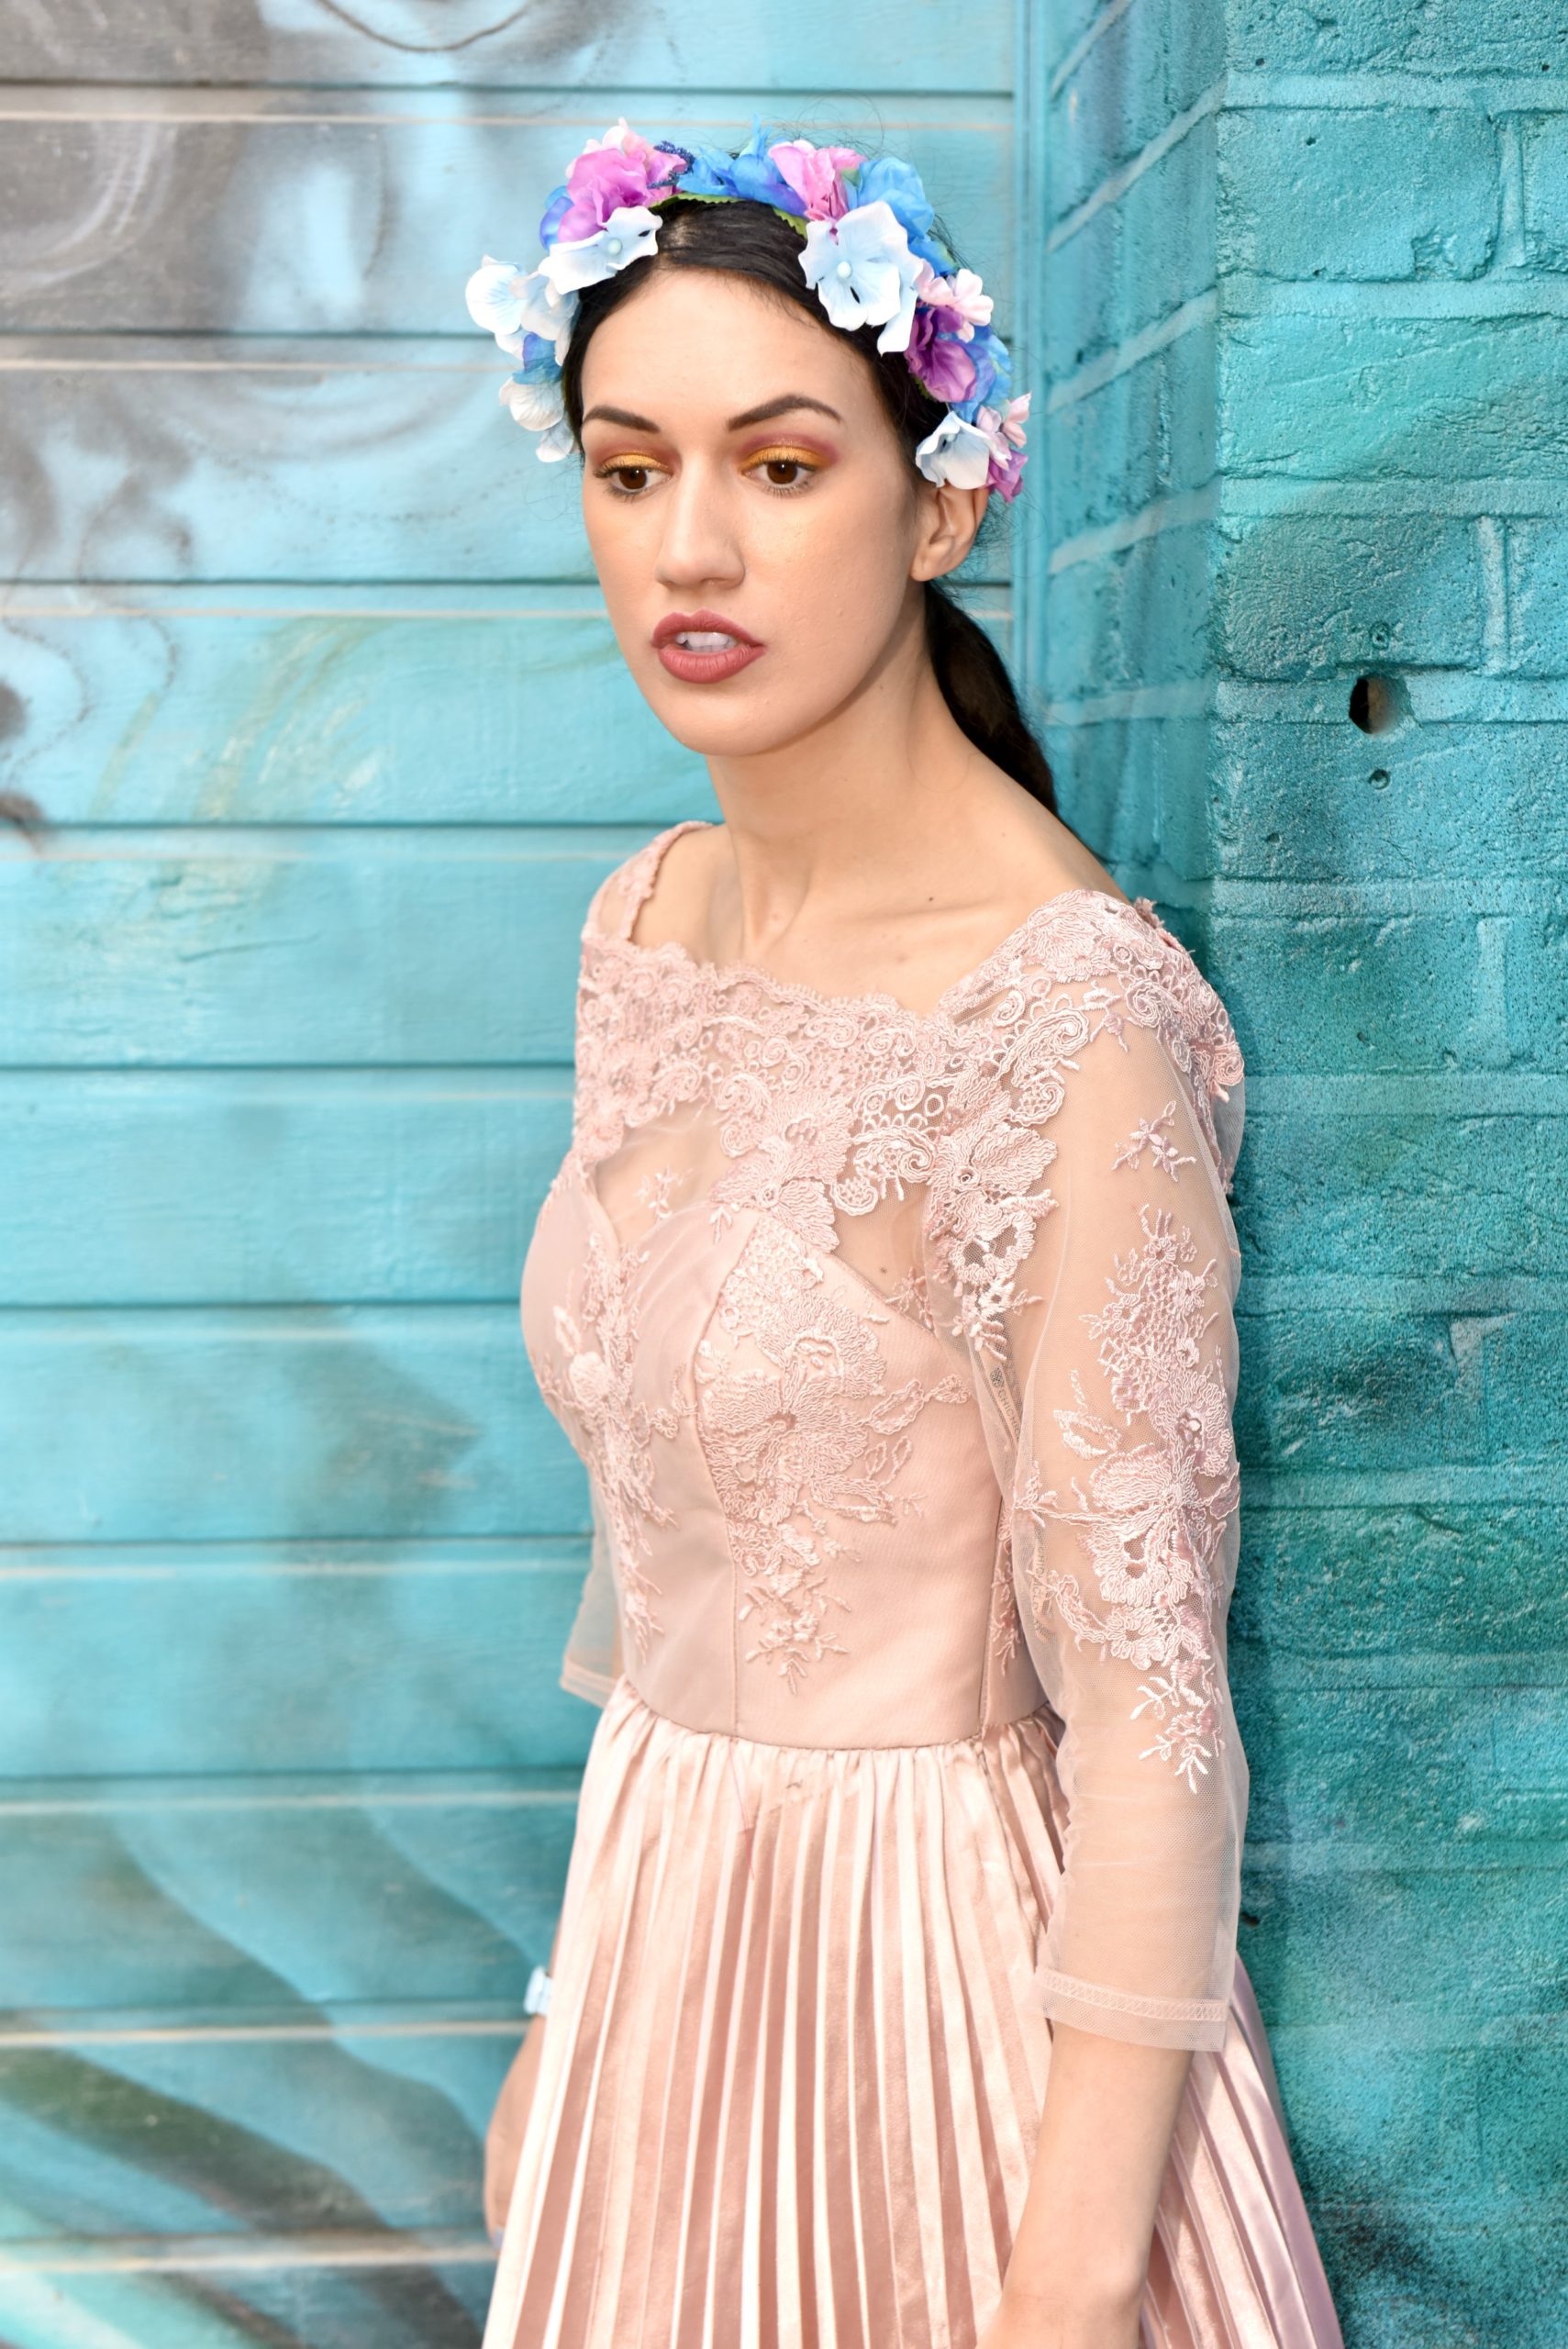 <img src="ana.jpg" alt="ana in pink pleated lace dress chi chi"/> 